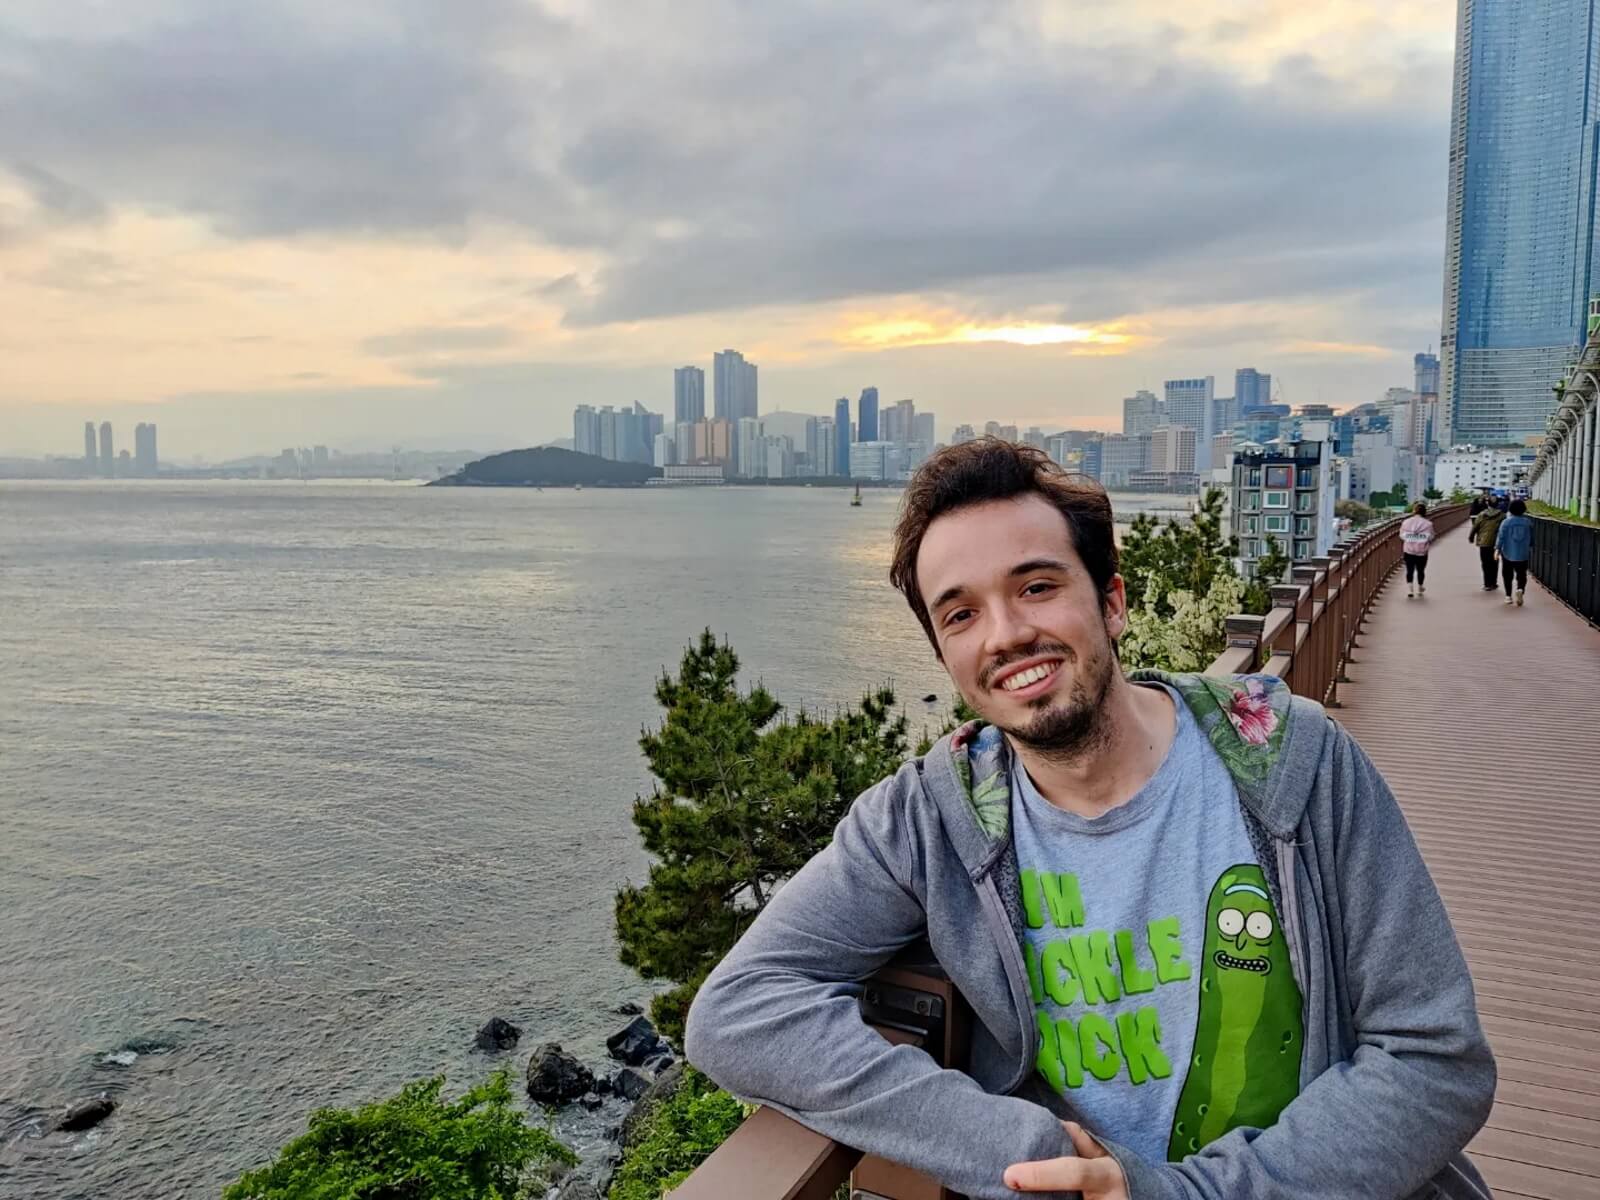 DigiPen alumnus Jon Zapata leans against a railing set against a city skyline next to water